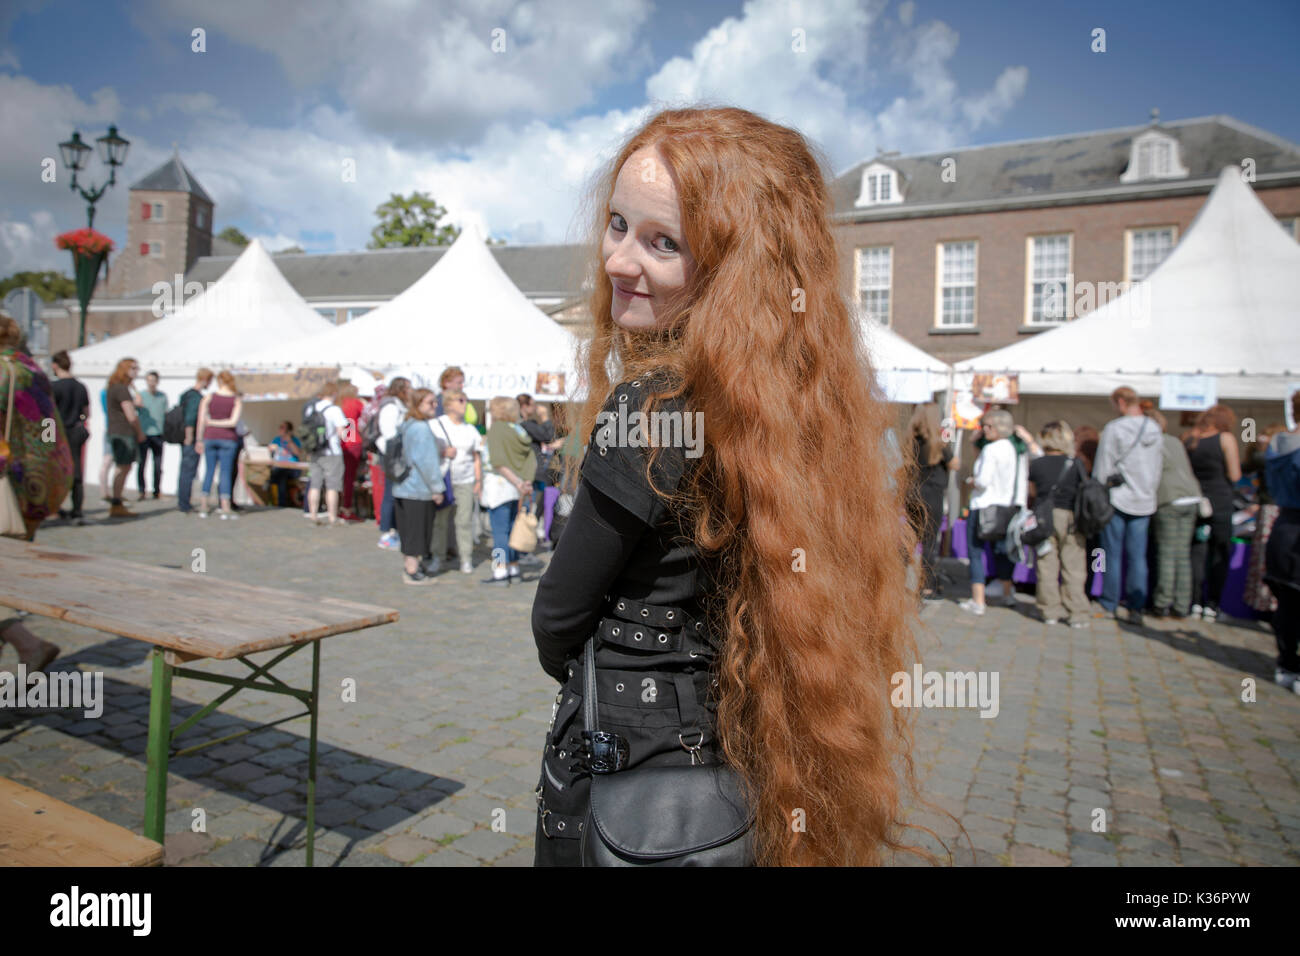 Breda, Holland. 02nd Sep, 2017. As every year, in the month of September is celebrated in the Dutch city of Breda the Redhead Days. It is an event that brings together red-haired people from all over the world every year. Fashion shows, hairdressing, seminars or art exhibitions are some of the activities that during a weekend invade the city center in this peculiar encounter. Credit: Nacho Calonge/Alamy Live News Stock Photo